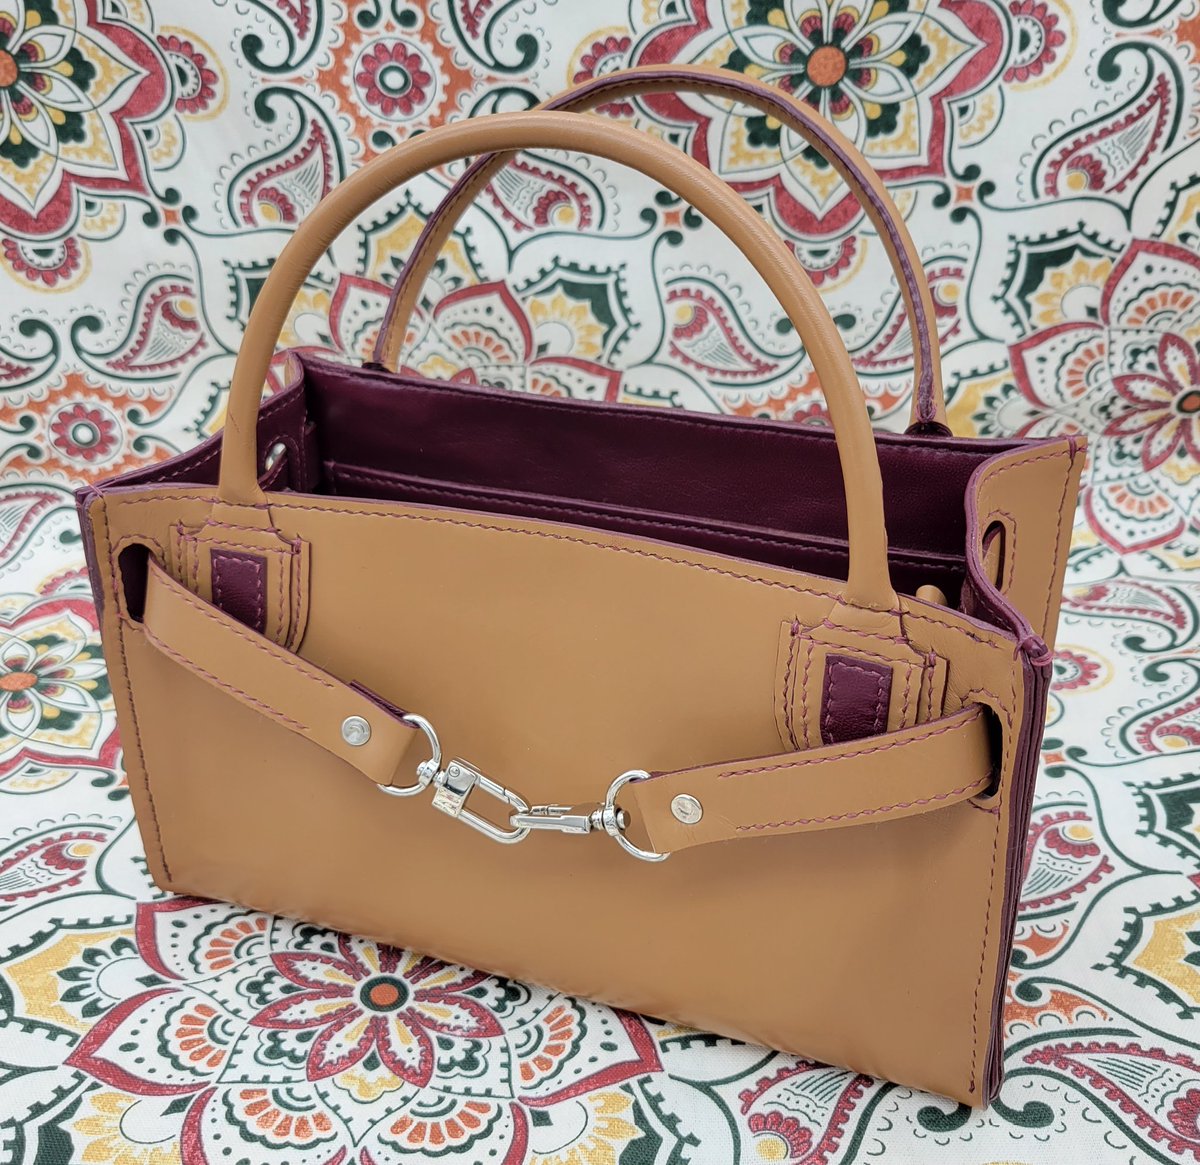 The Olivia features a fully leather lined interior with a detachable clutch that doubles as a divider. Completely hand stitched bag! 

#Olivia #bagoftheday #saturdayfashion #handbagdesigner #fashionstyles #purseaddict #purseblog